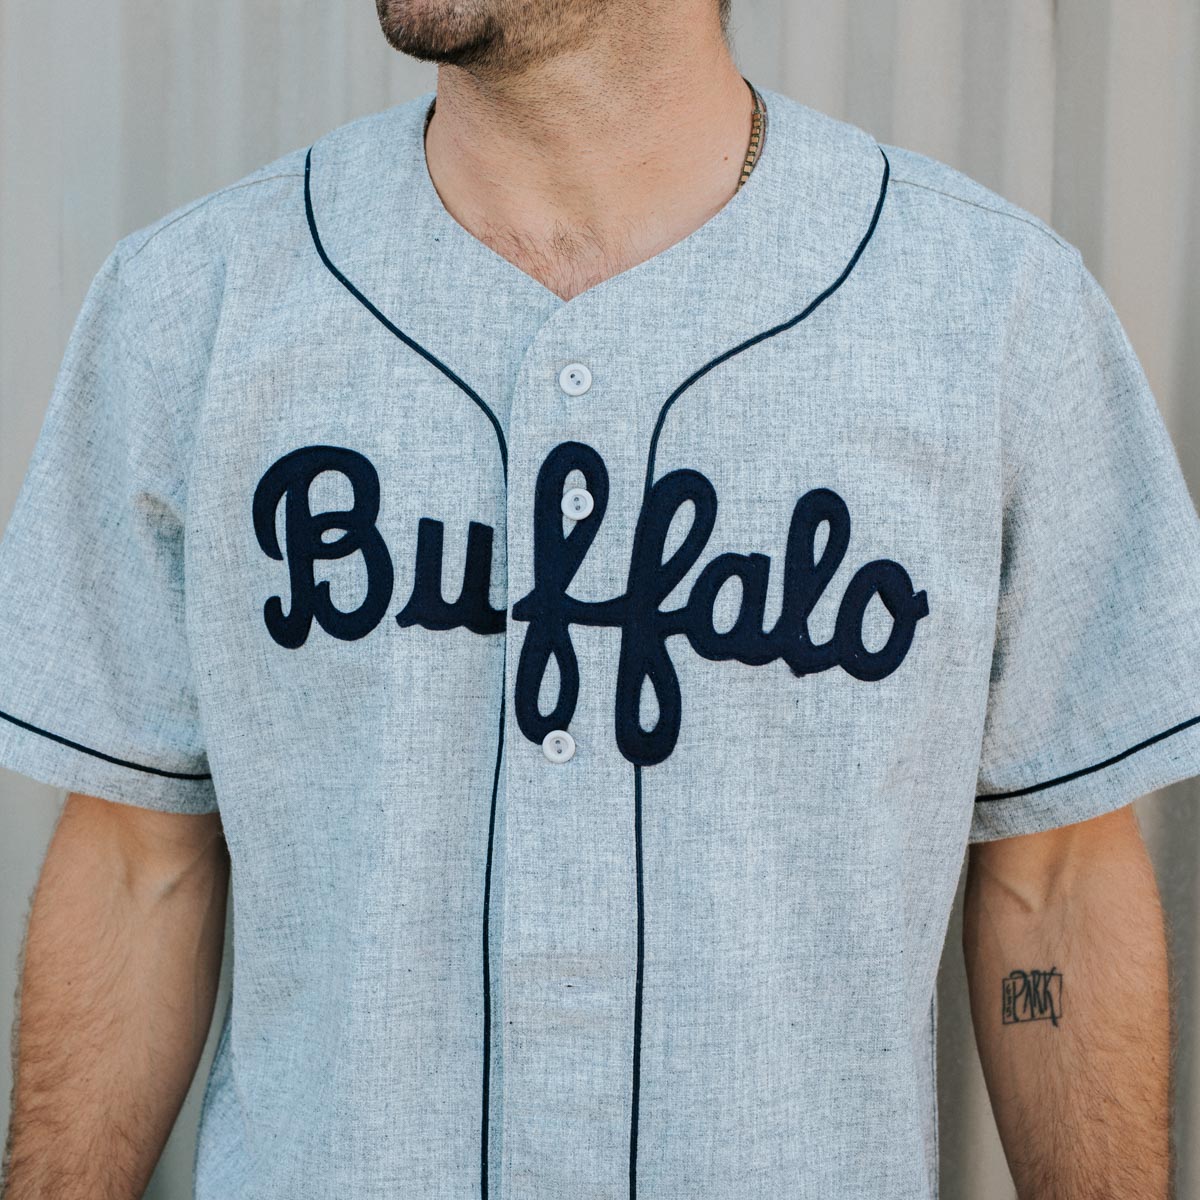 Buffalo Bisons 1959 Road Jersey